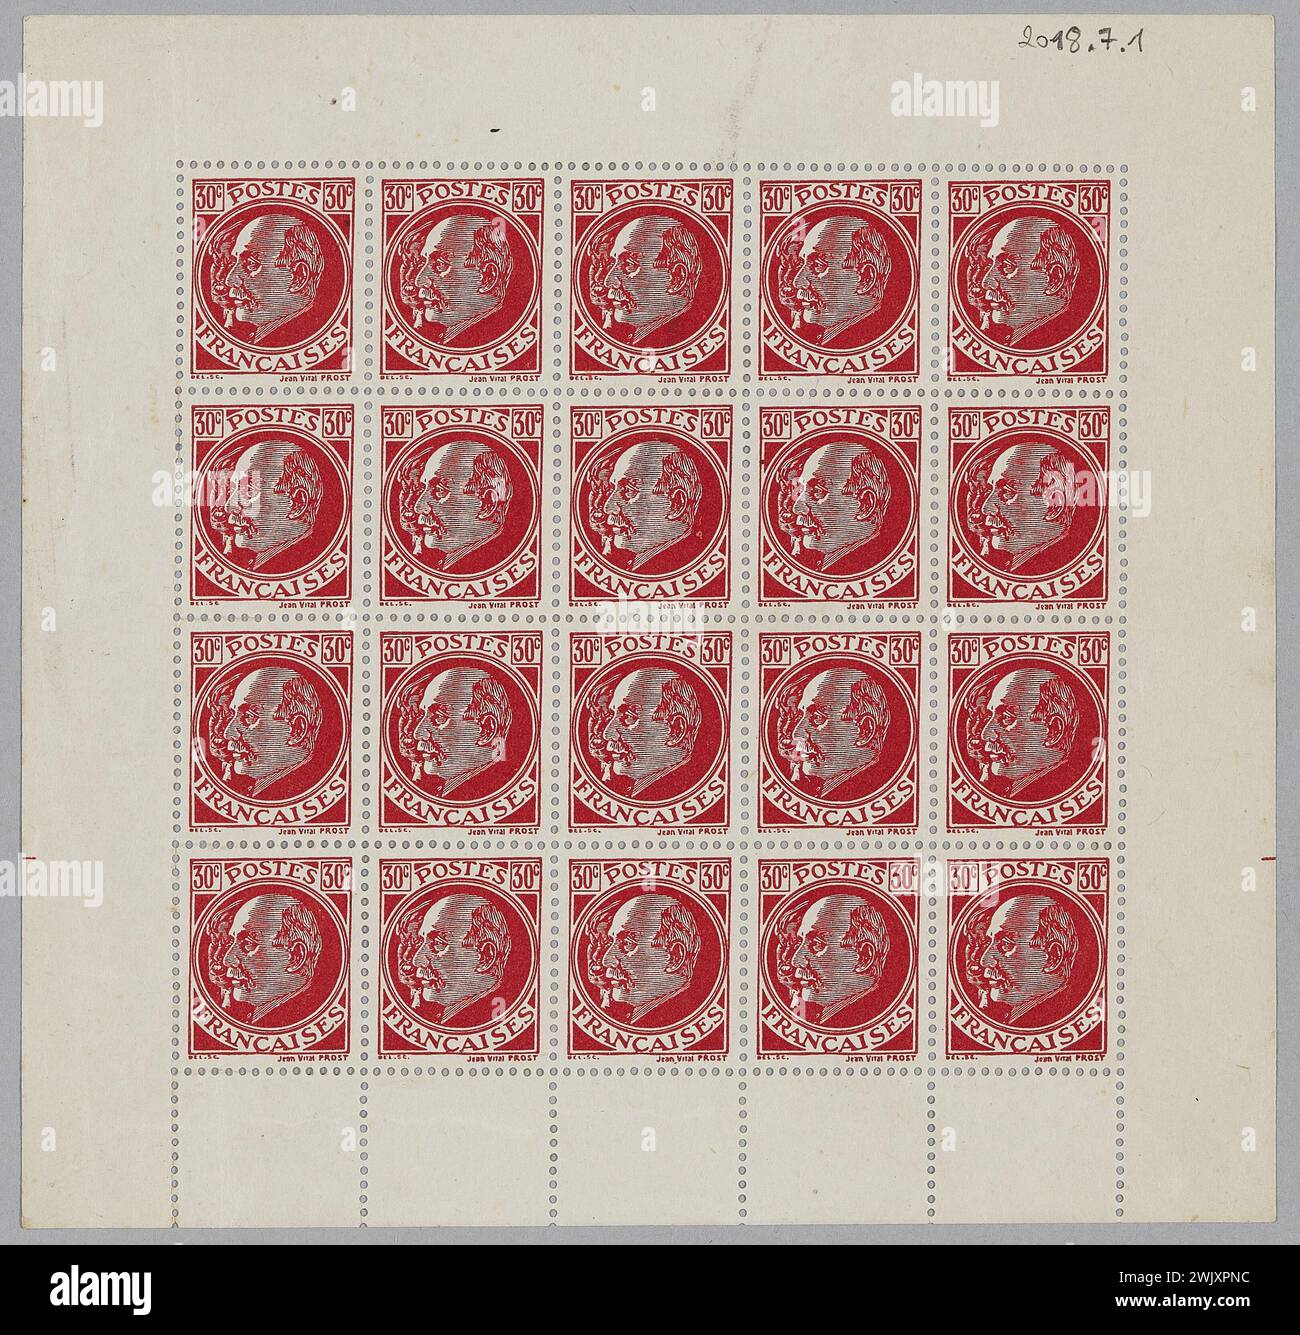 Central information and action office (BCRA) (n. - d.), Plate of twenty false stamps Pétain -Laval 30c issued by the BCRA (attributed title), 1942. Printed paper. Museum of the Liberation of Paris - General Leclerc Museum - Jean Moulin Museum. Stock Photo